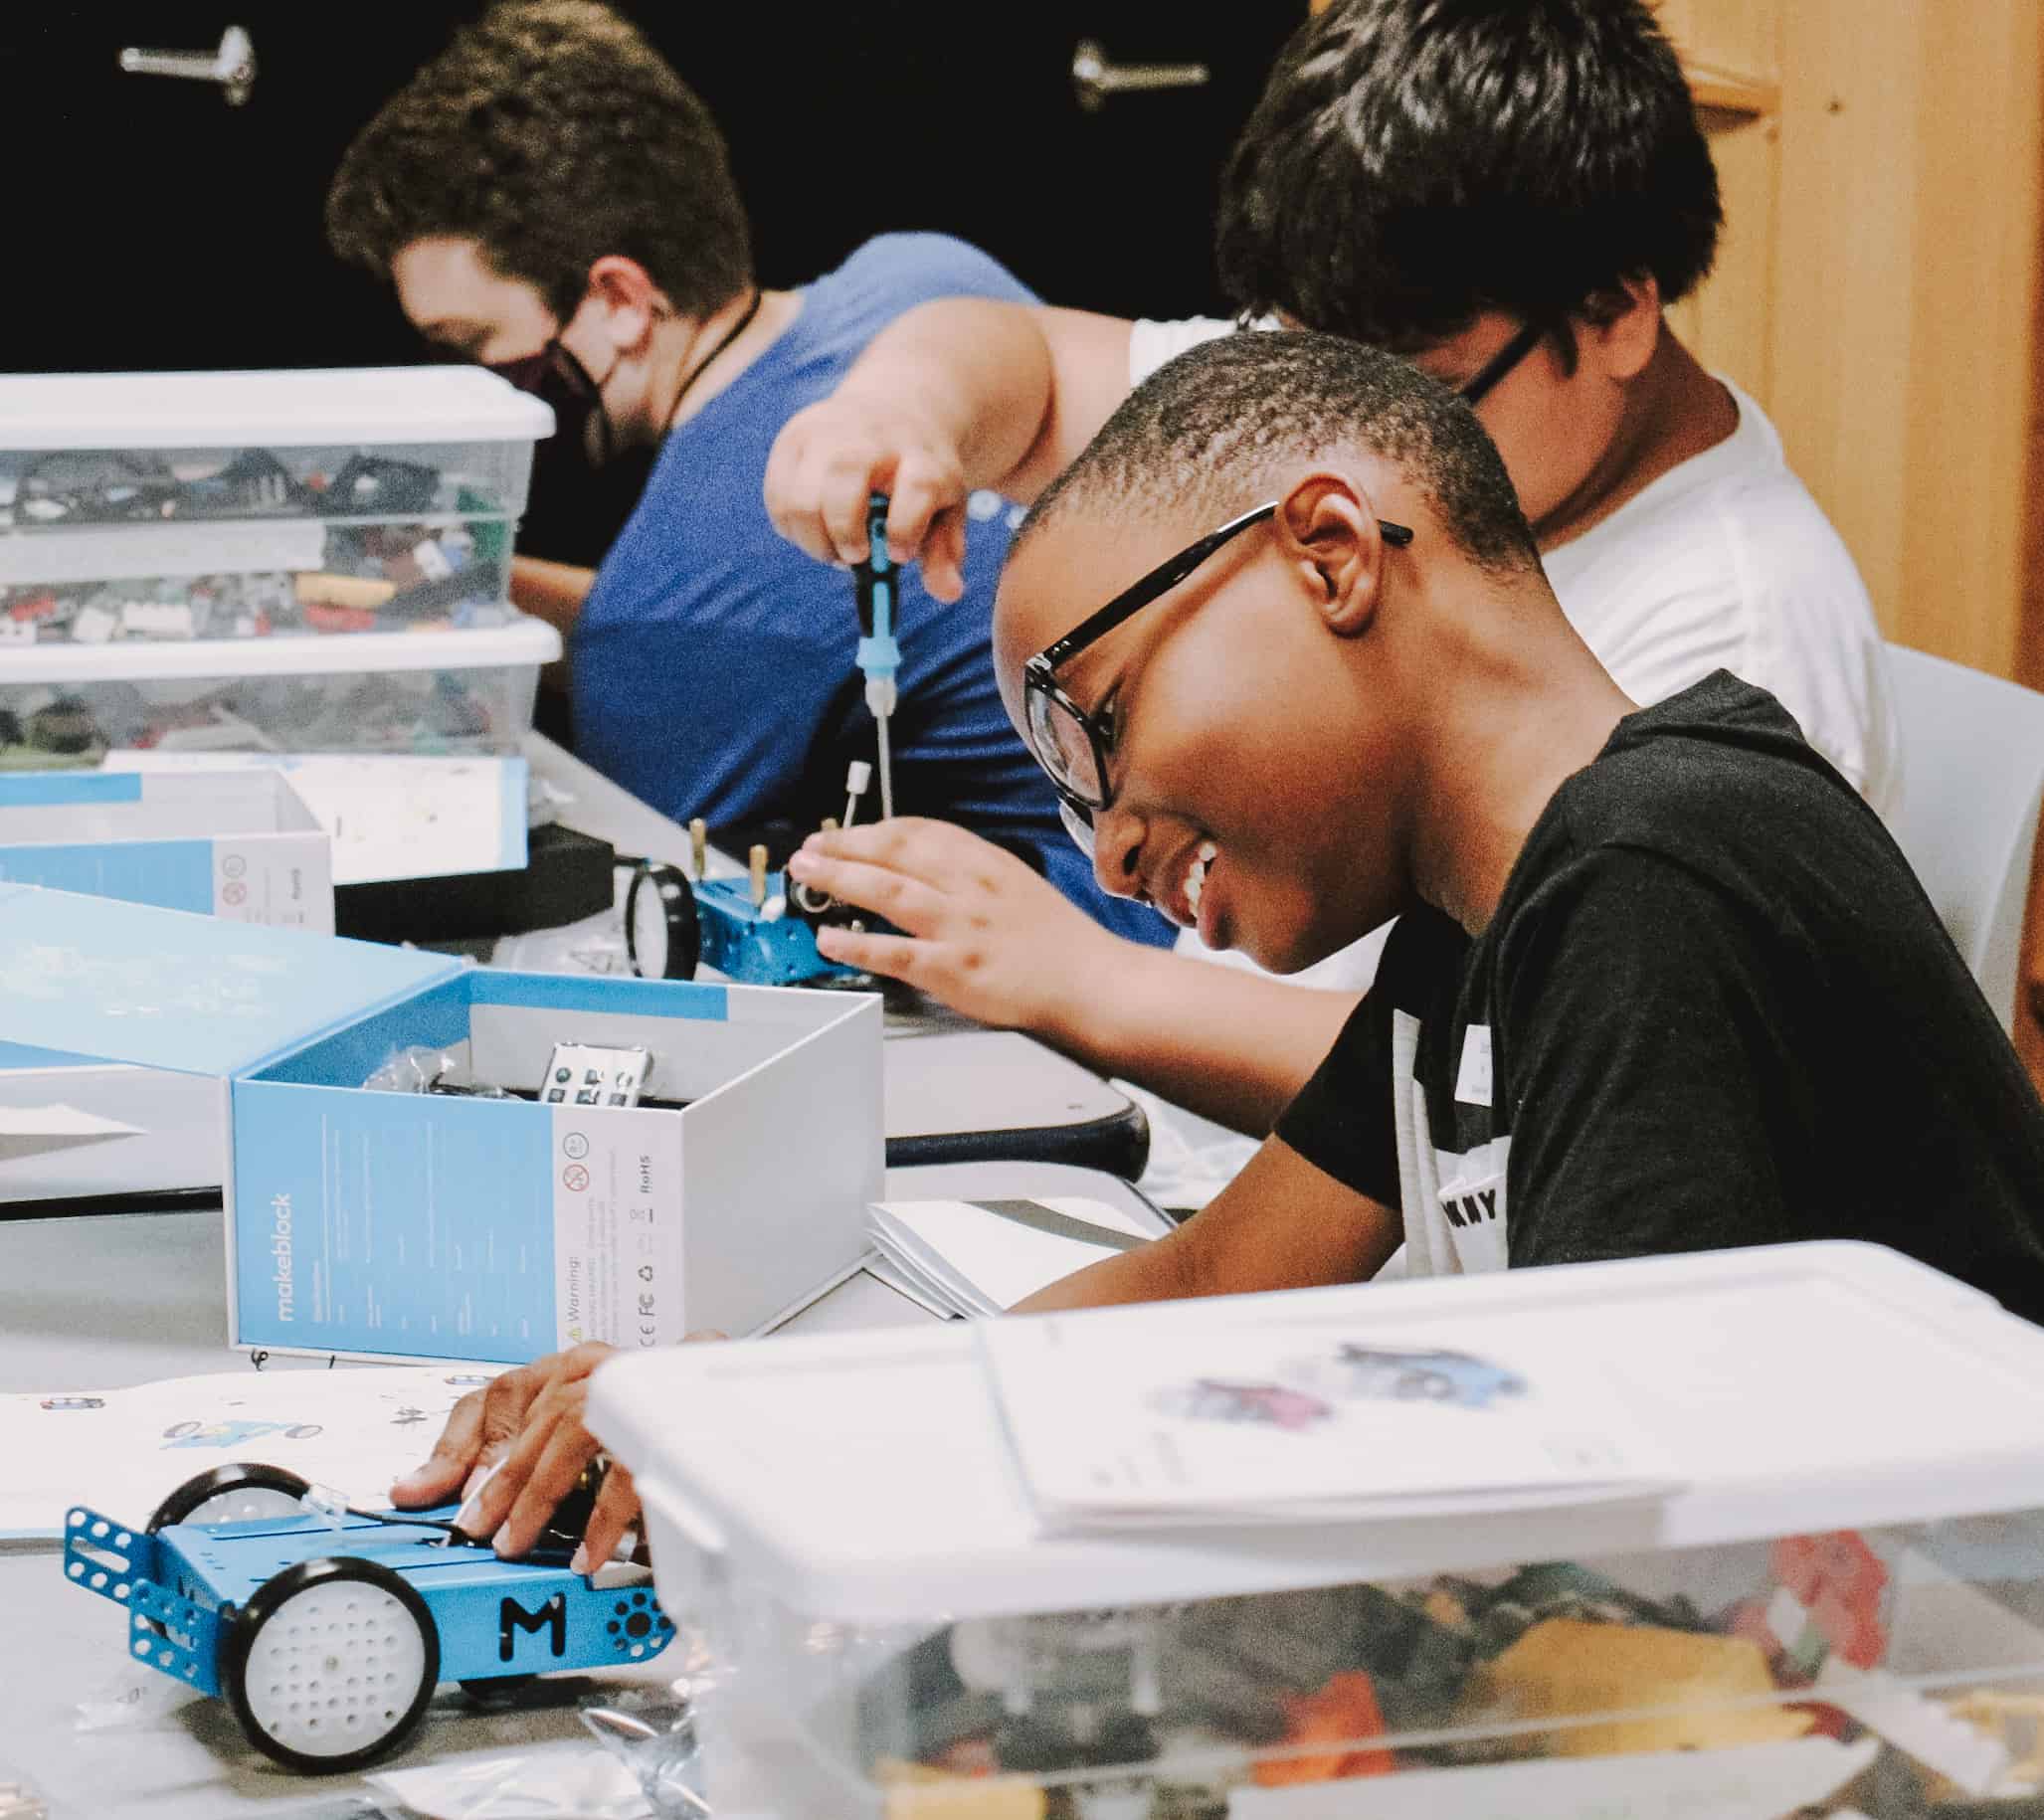 You are currently viewing LEGO Robot Building and Programming for ages 5 to 8, 9 to 13 | 10/8/22, 10 am to 2:30 pm | Upper Arlington